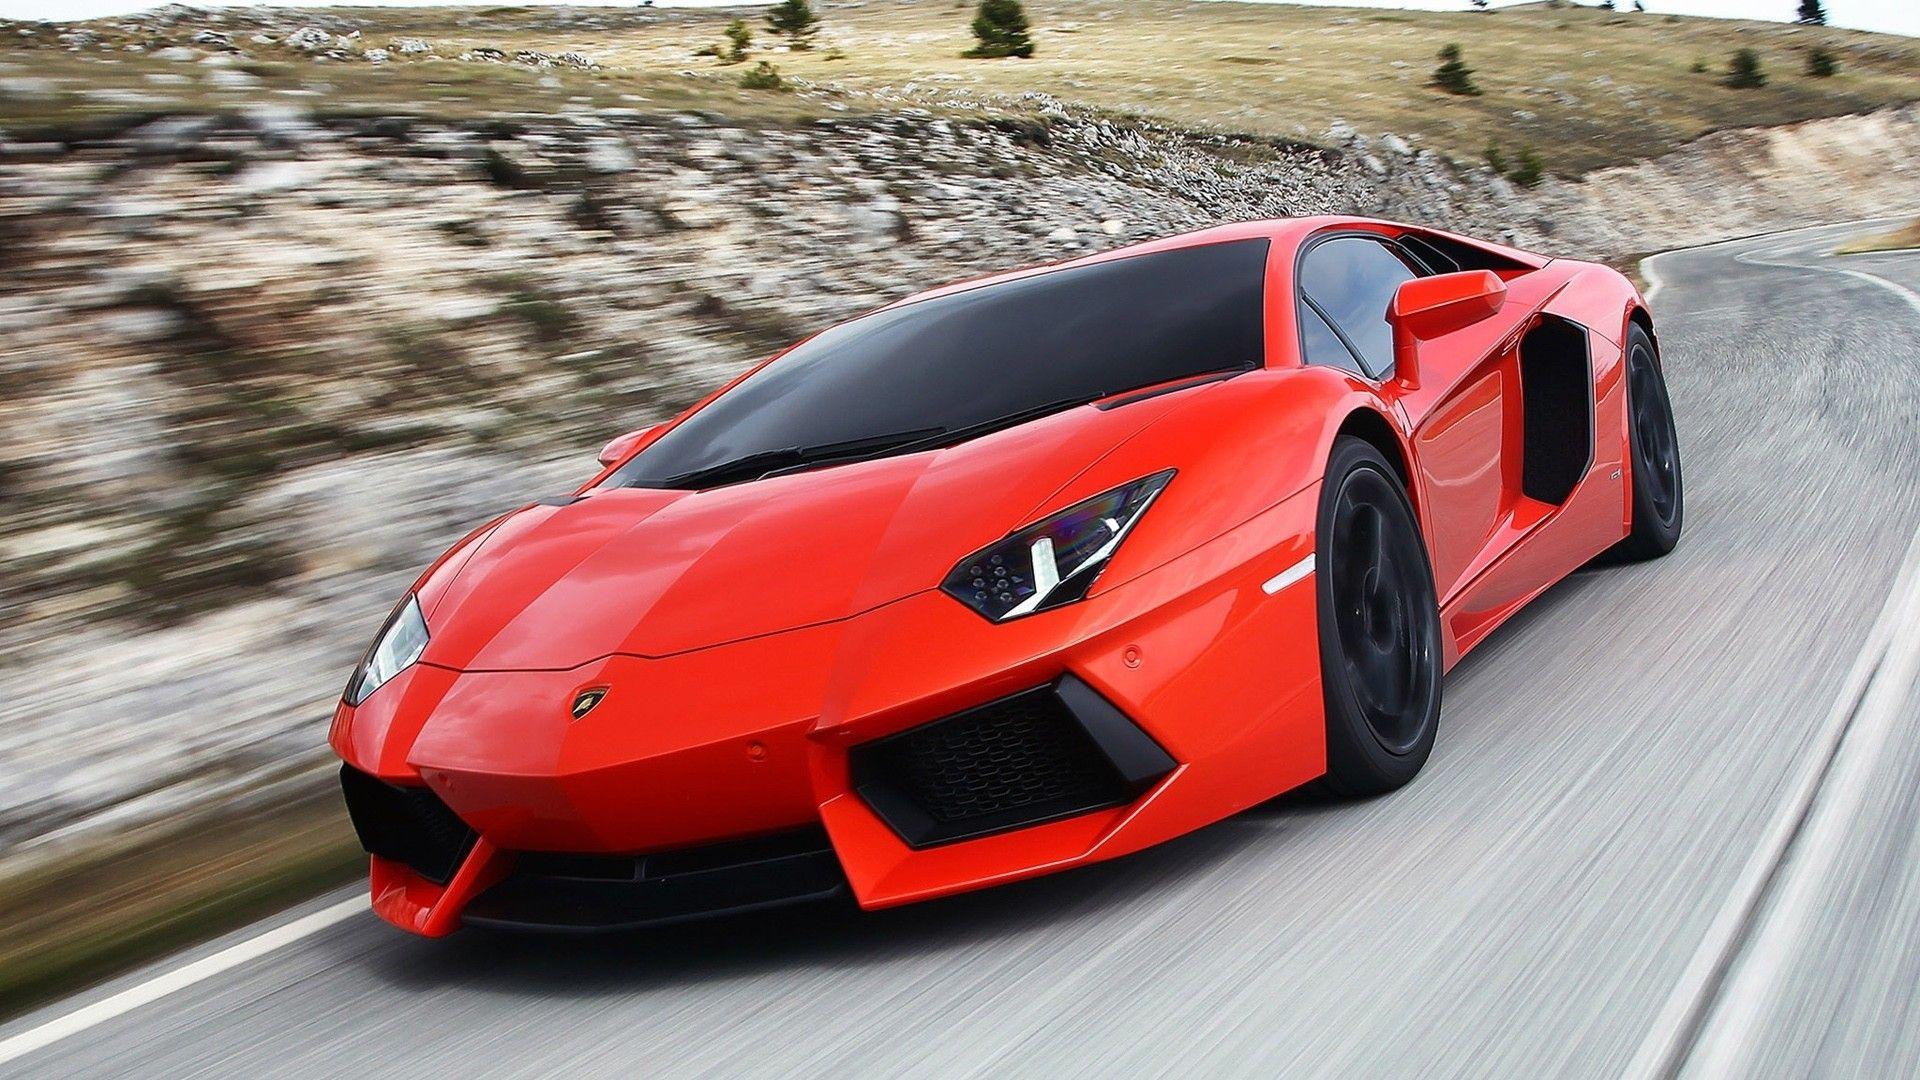 Red Cars Wallpapers Wallpaper Cave Images, Photos, Reviews